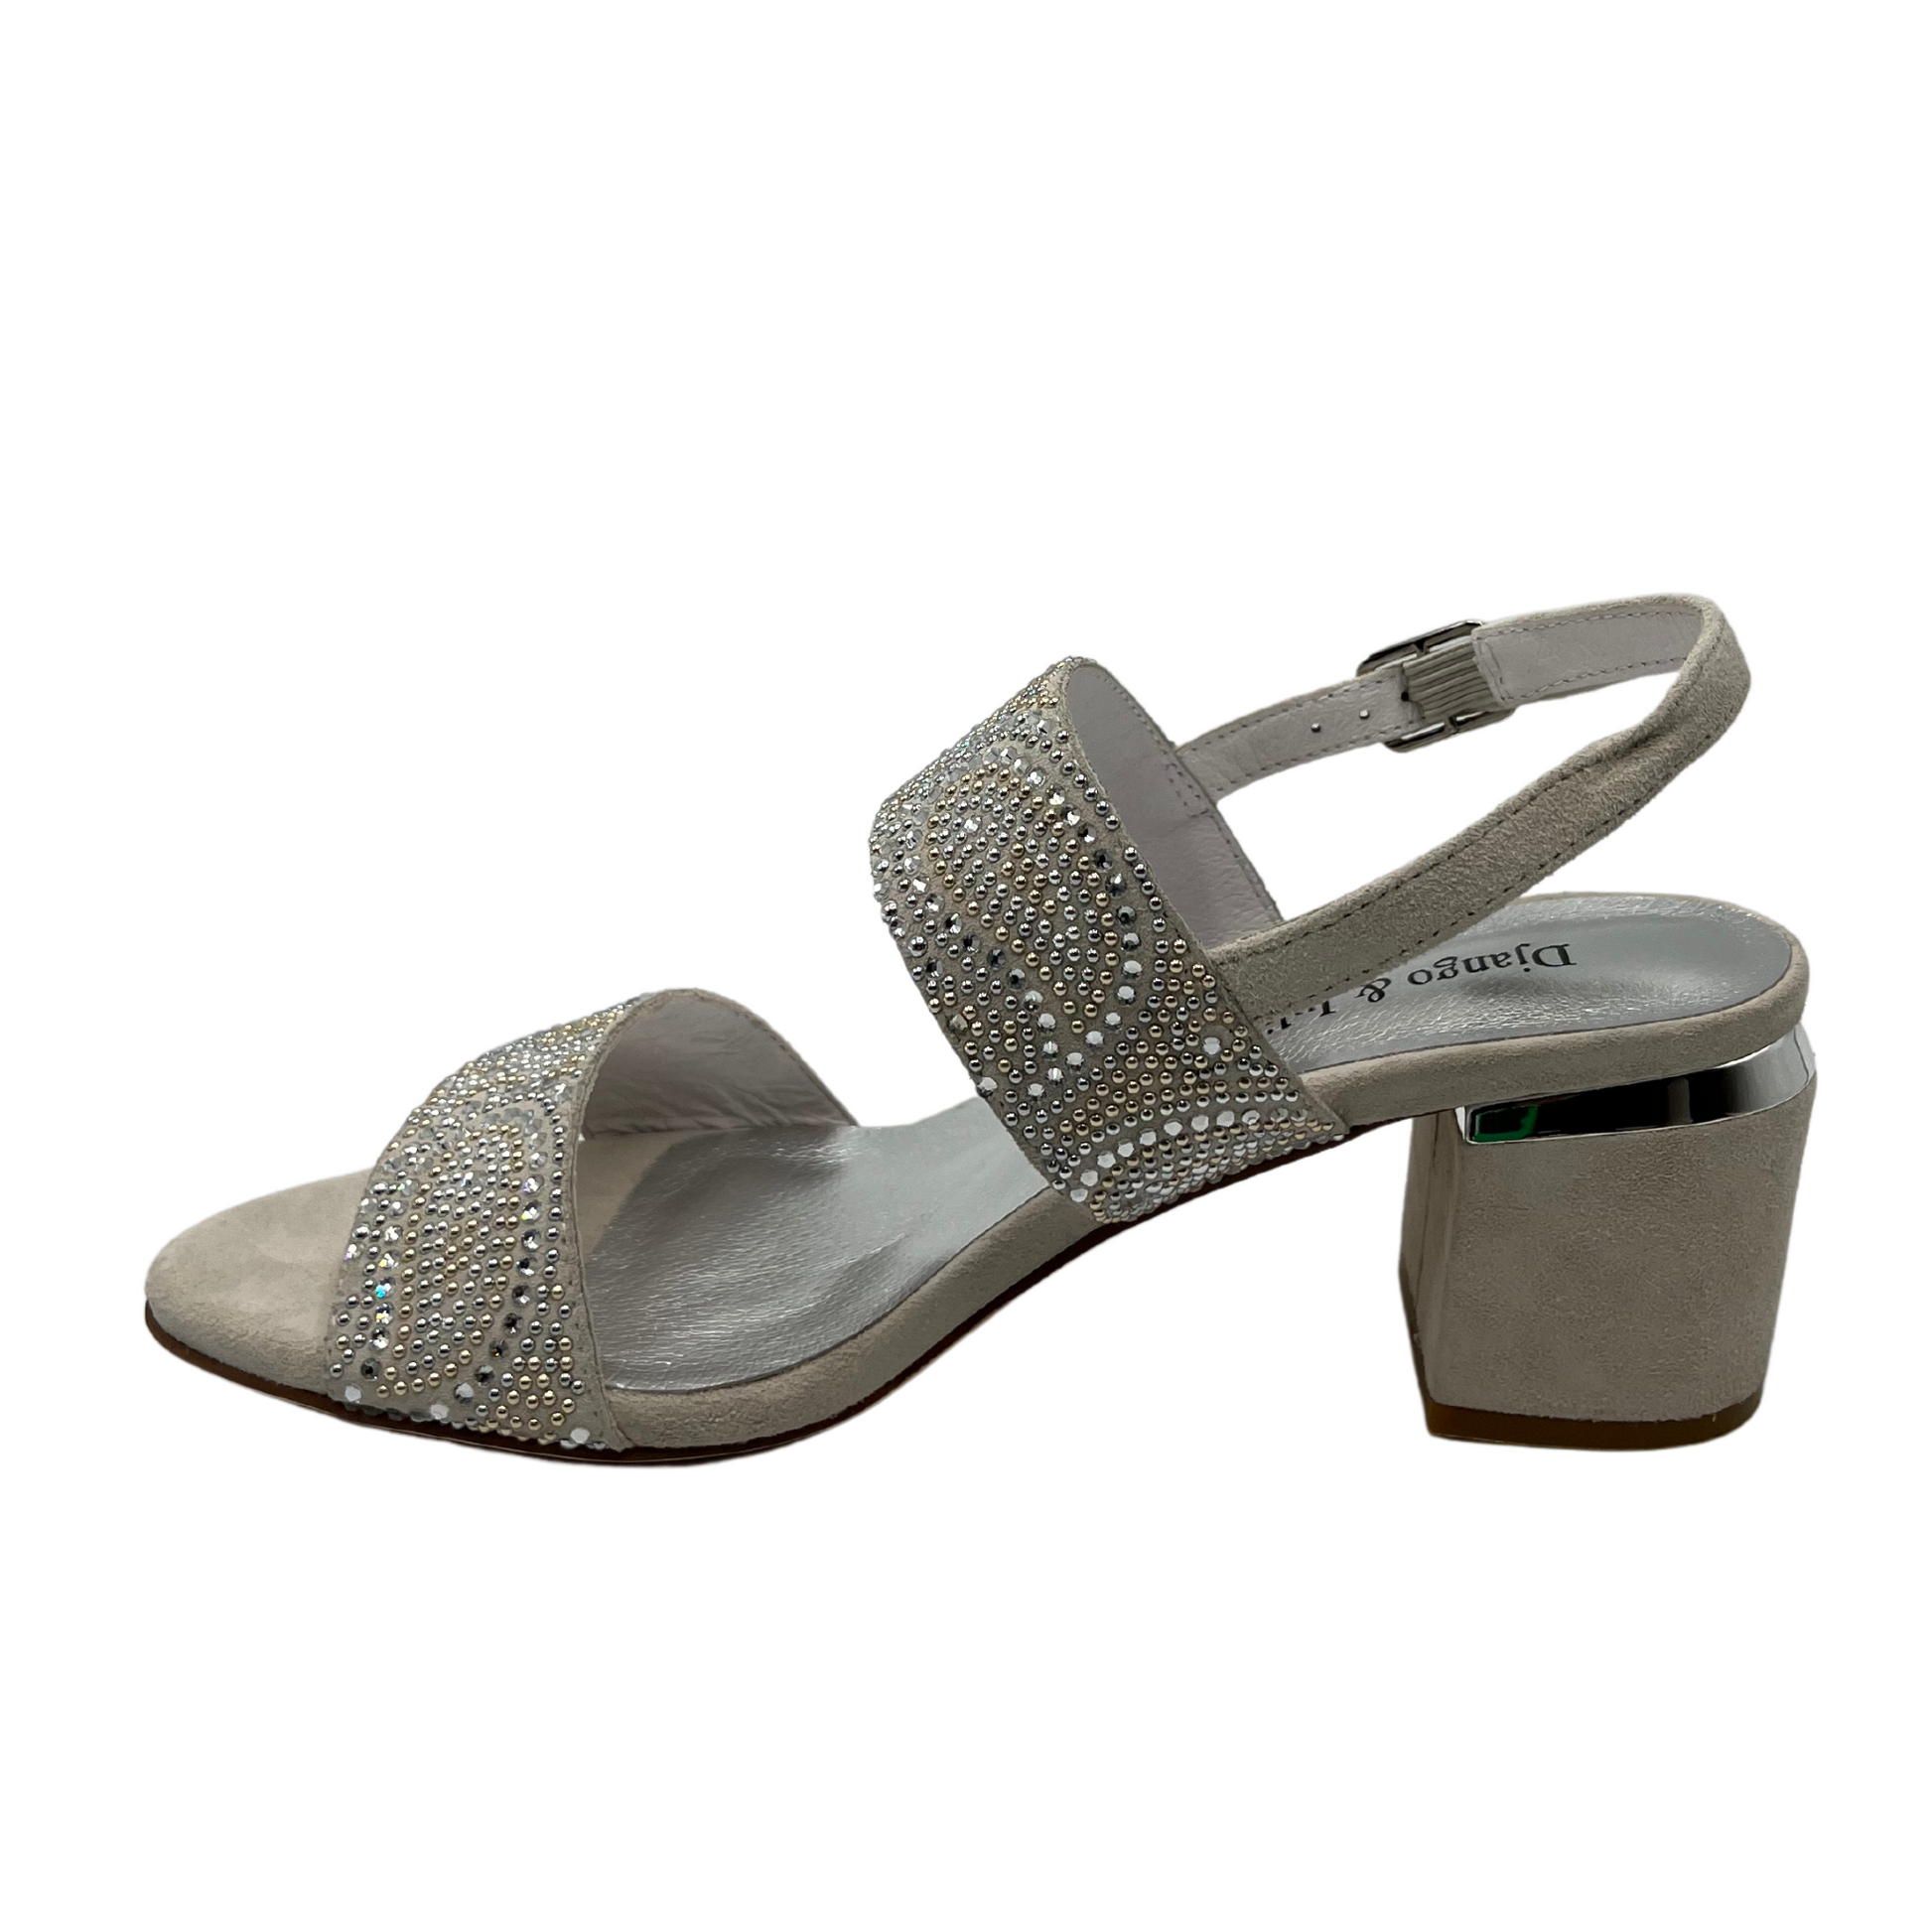 Left facing view of silver suede and leather sandal with beaded details and sling back strap